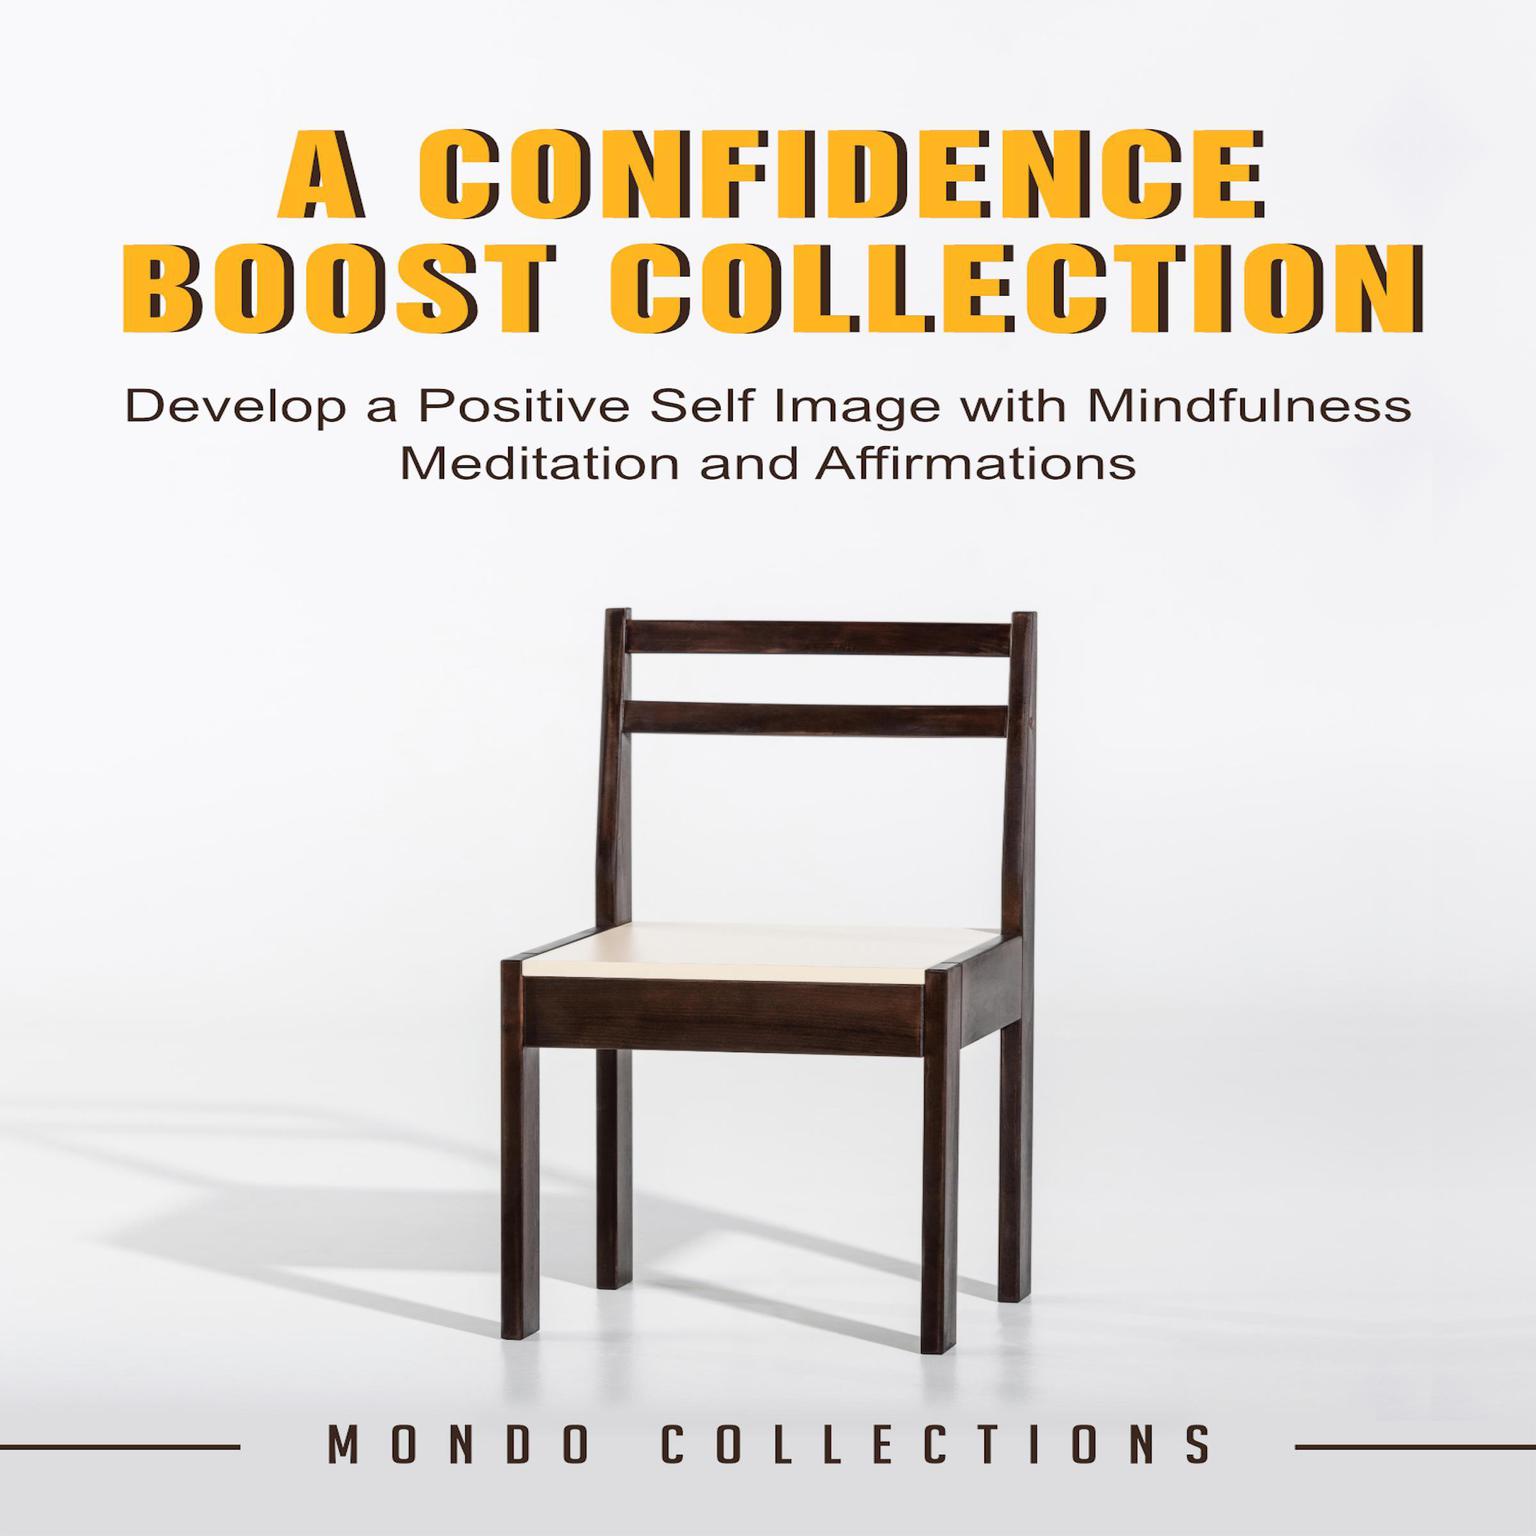 A Confidence Boost Collection: Develop a Positive Self Image with Mindfulness Meditation and Affirmations Audiobook, by Mondo Collections